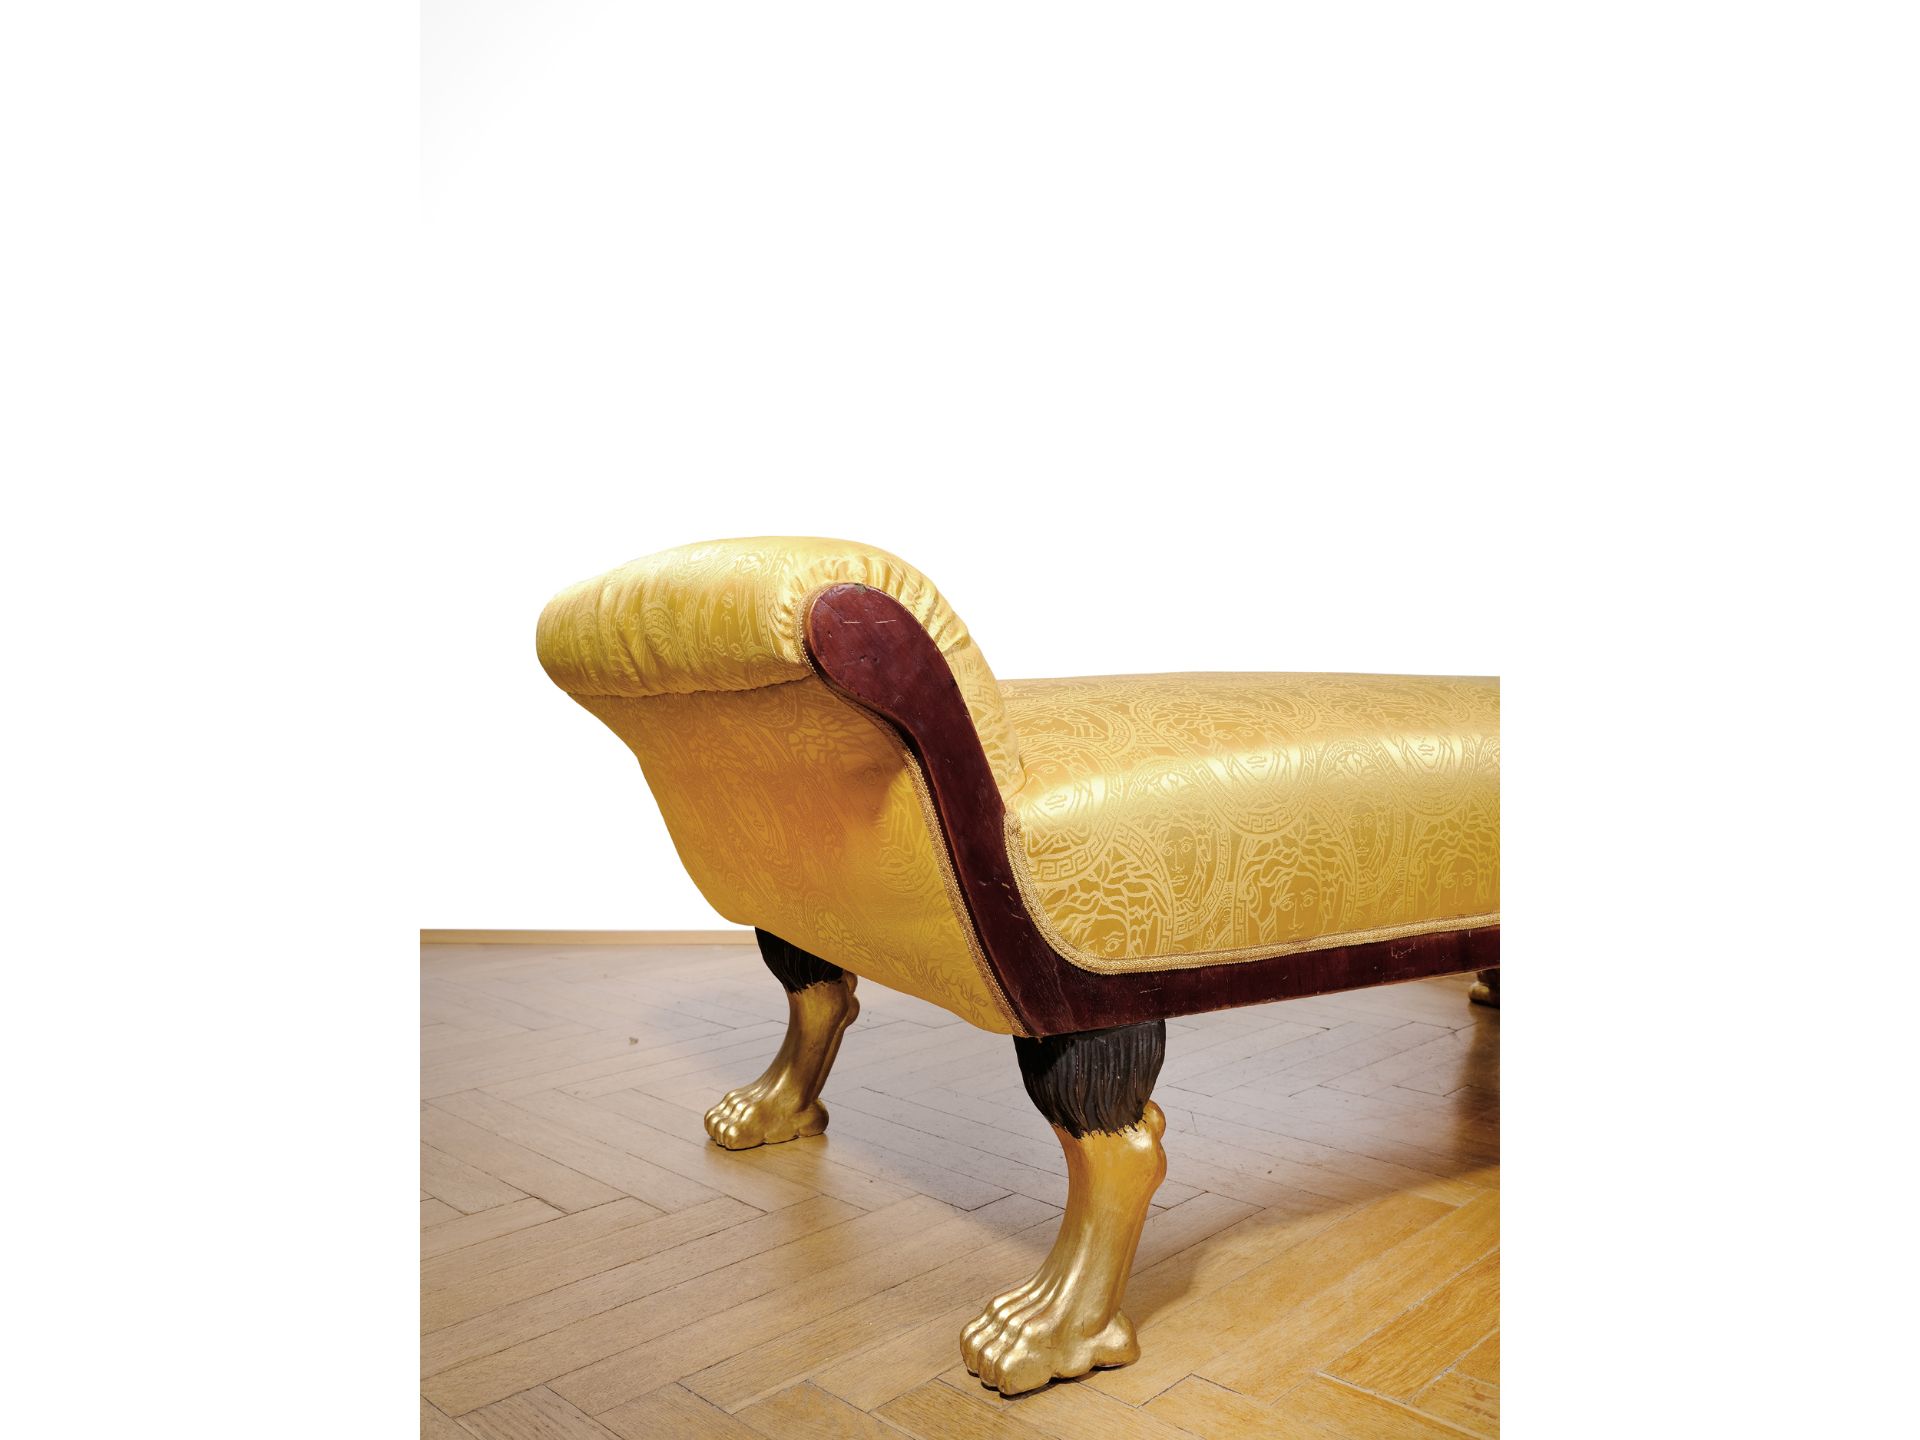 Chaise longue, German or French, Biedermeier - Image 4 of 4